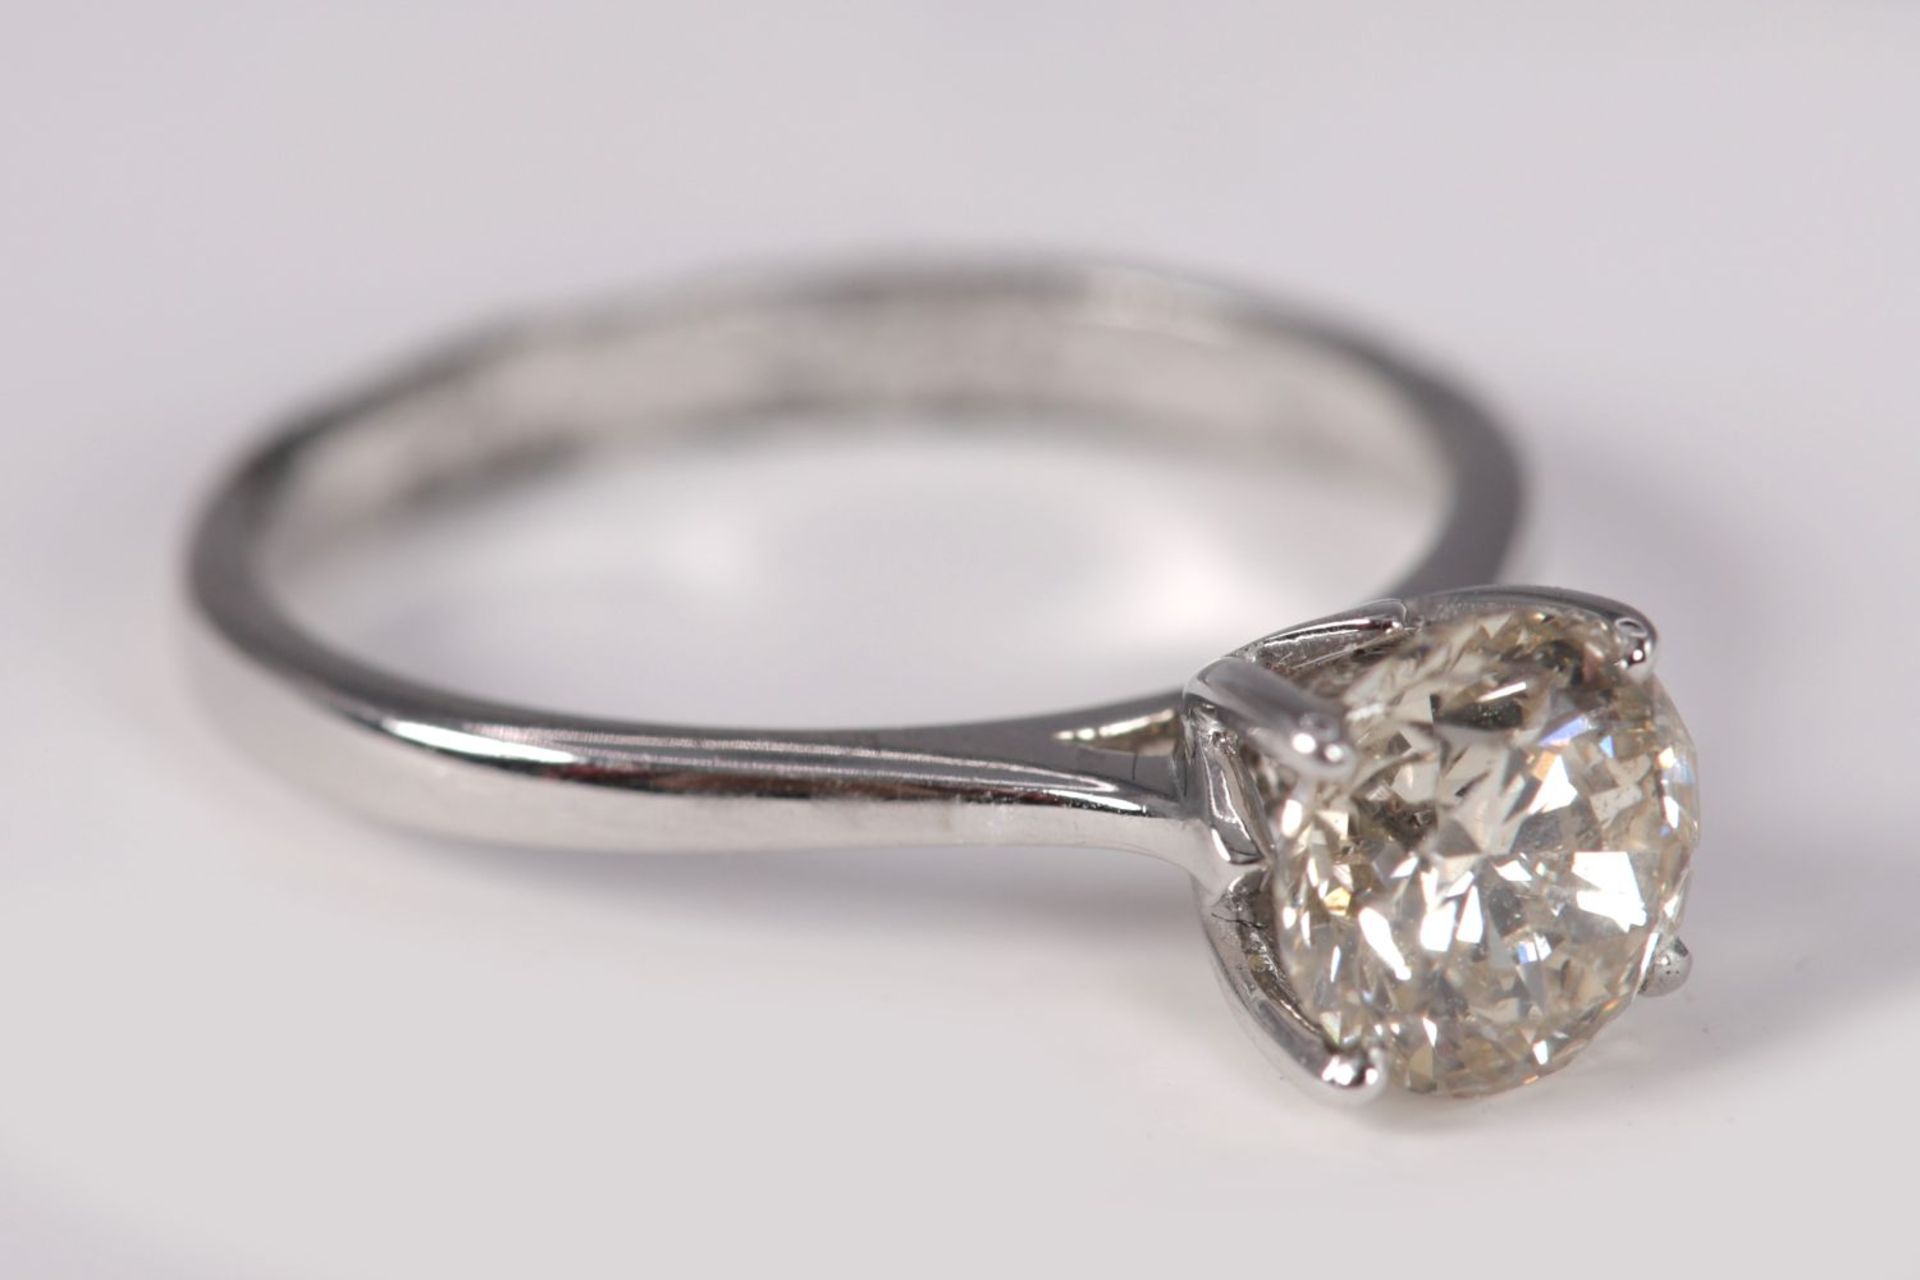 18K WHITE GOLD SOLITAIRE DIAMOND RING - Image 3 of 4